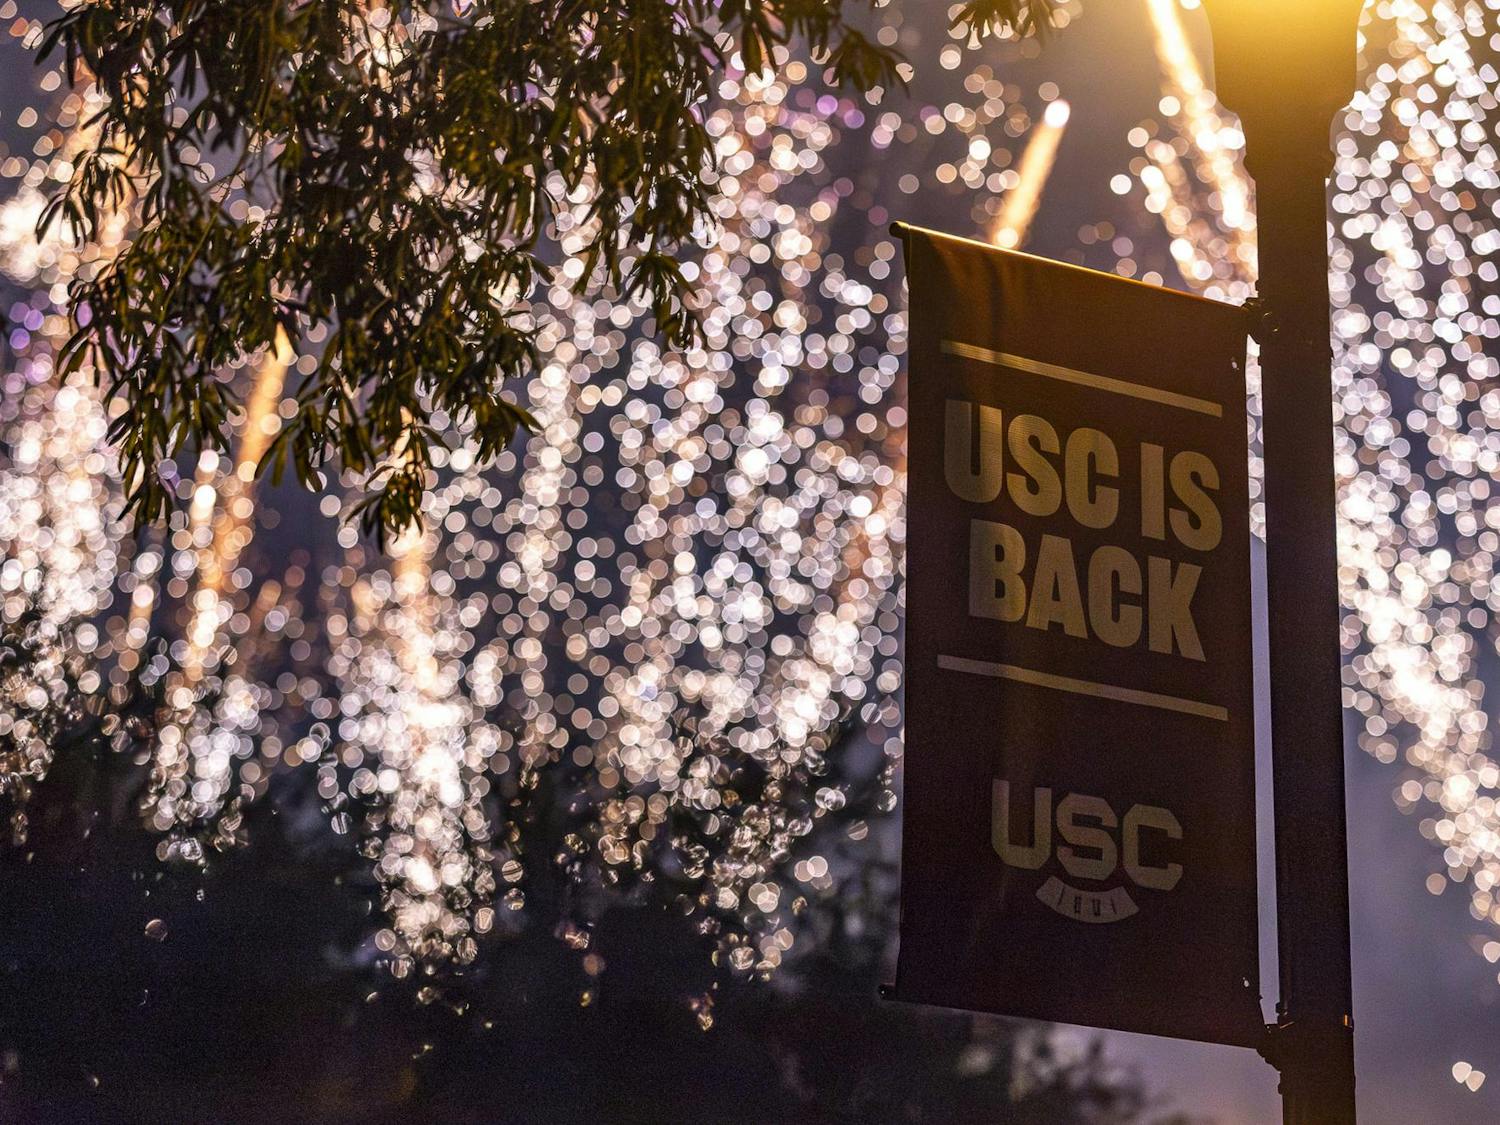 A banner with the slogan "USC IS BACK" sits in front of the First Night Carolina firework finale on Aug. 23, 2023. The event celebrates the start of the new school year.